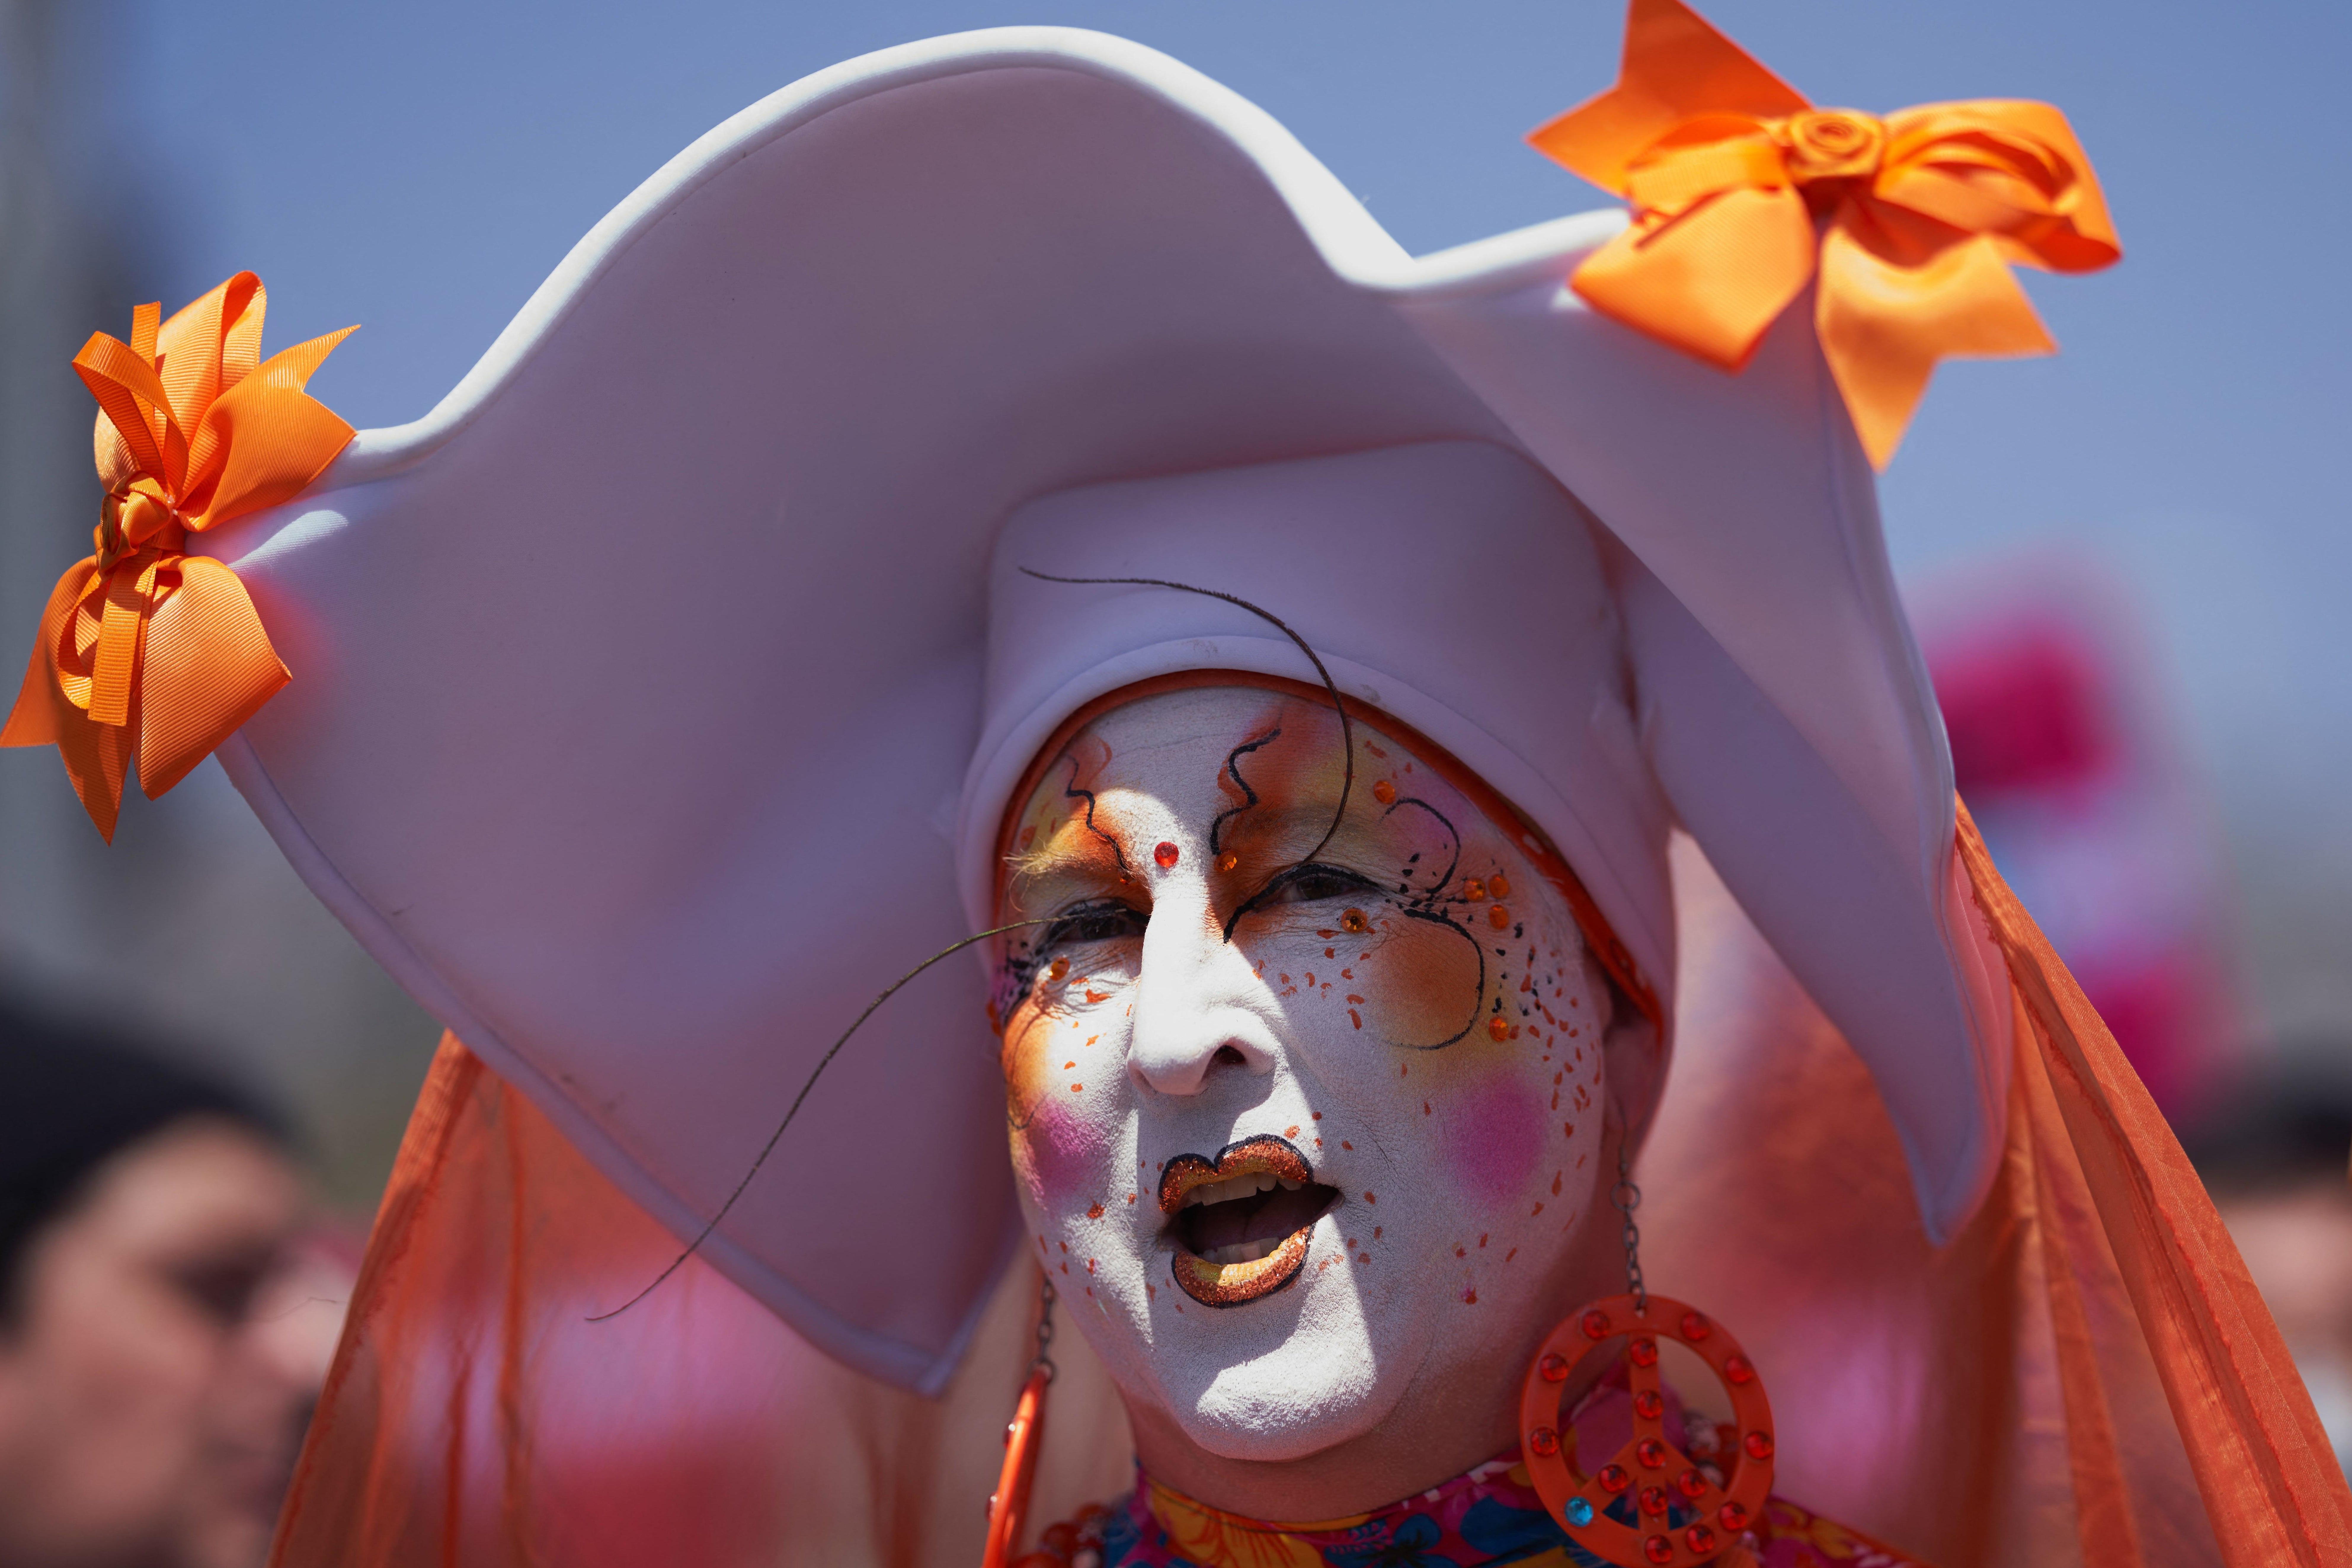 LA Dodgers apologize to Sisters of Perpetual Indulgence for disinviting  them from their Pride Night